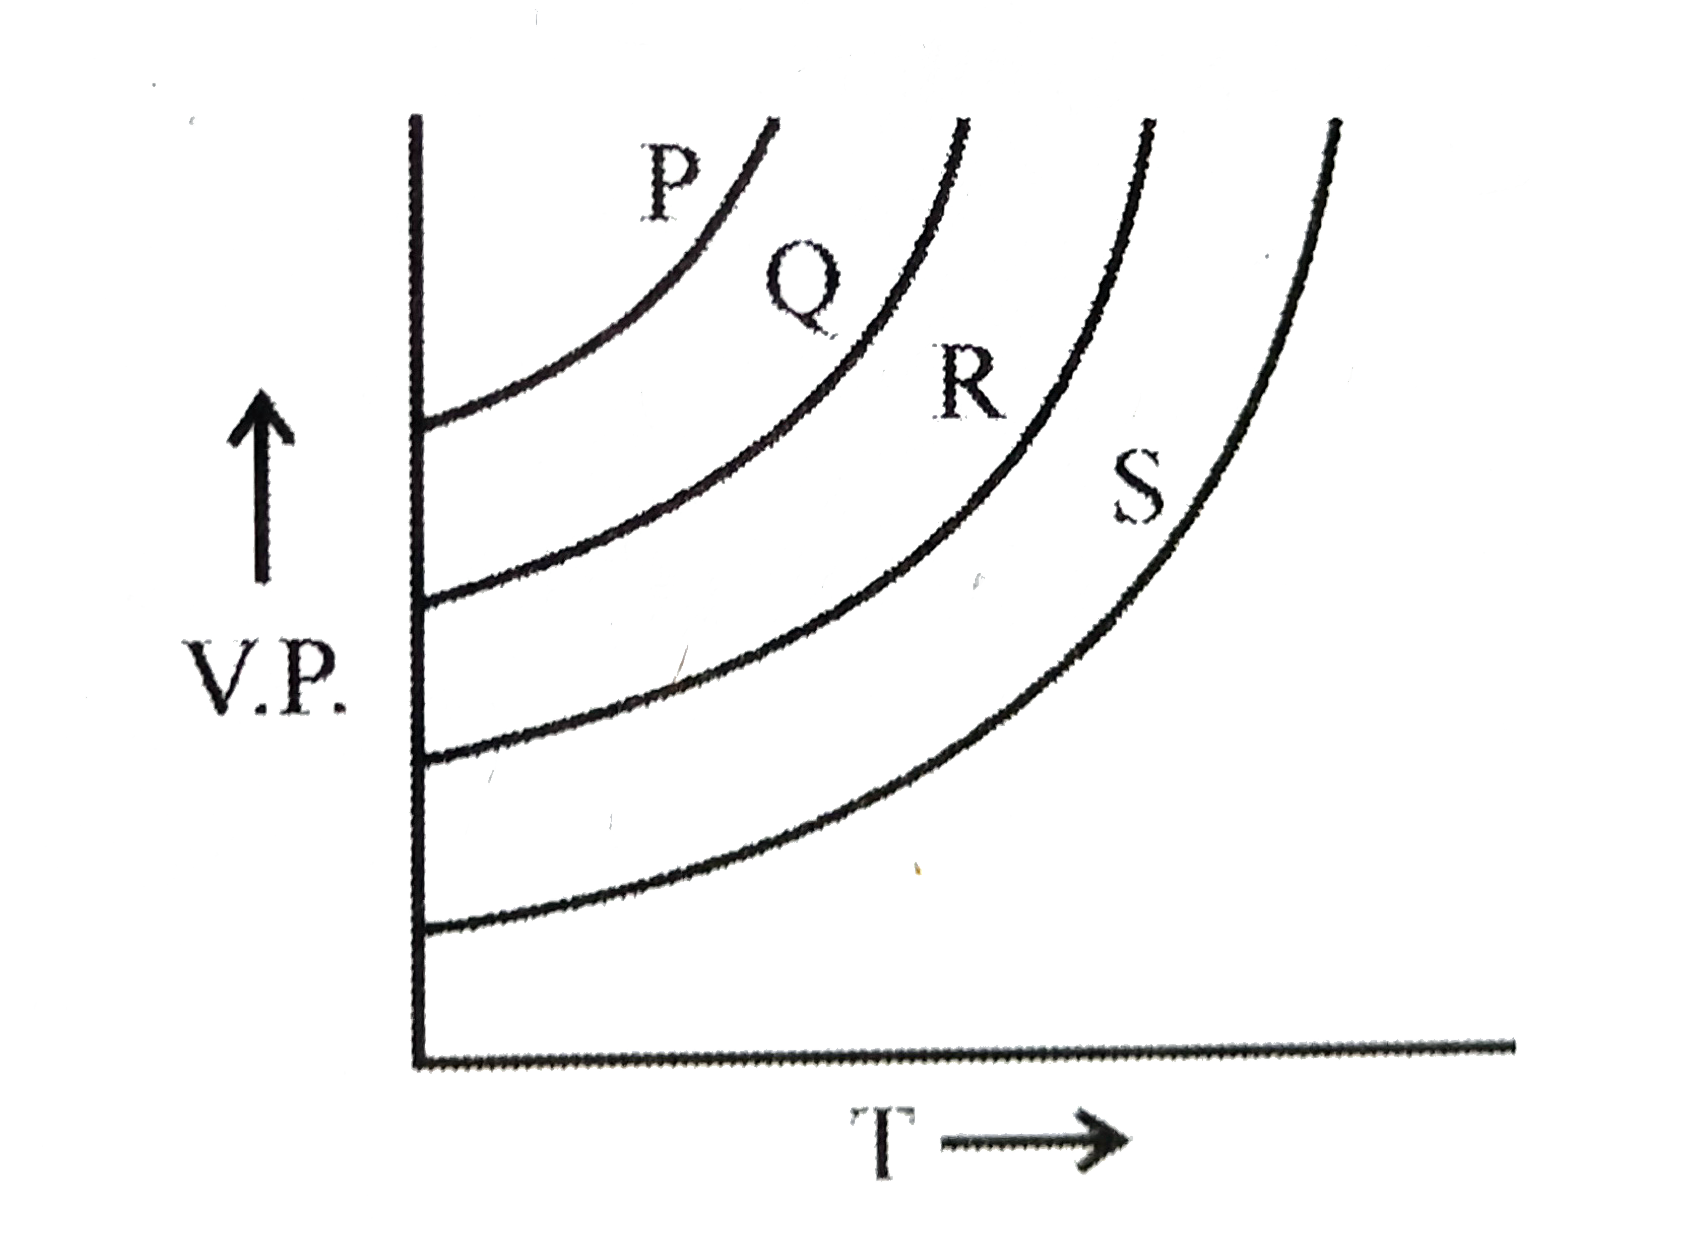 The given graph shows the vapour pressure -temperature curves for some liquids.Liquids P,Q,R and S respectively are